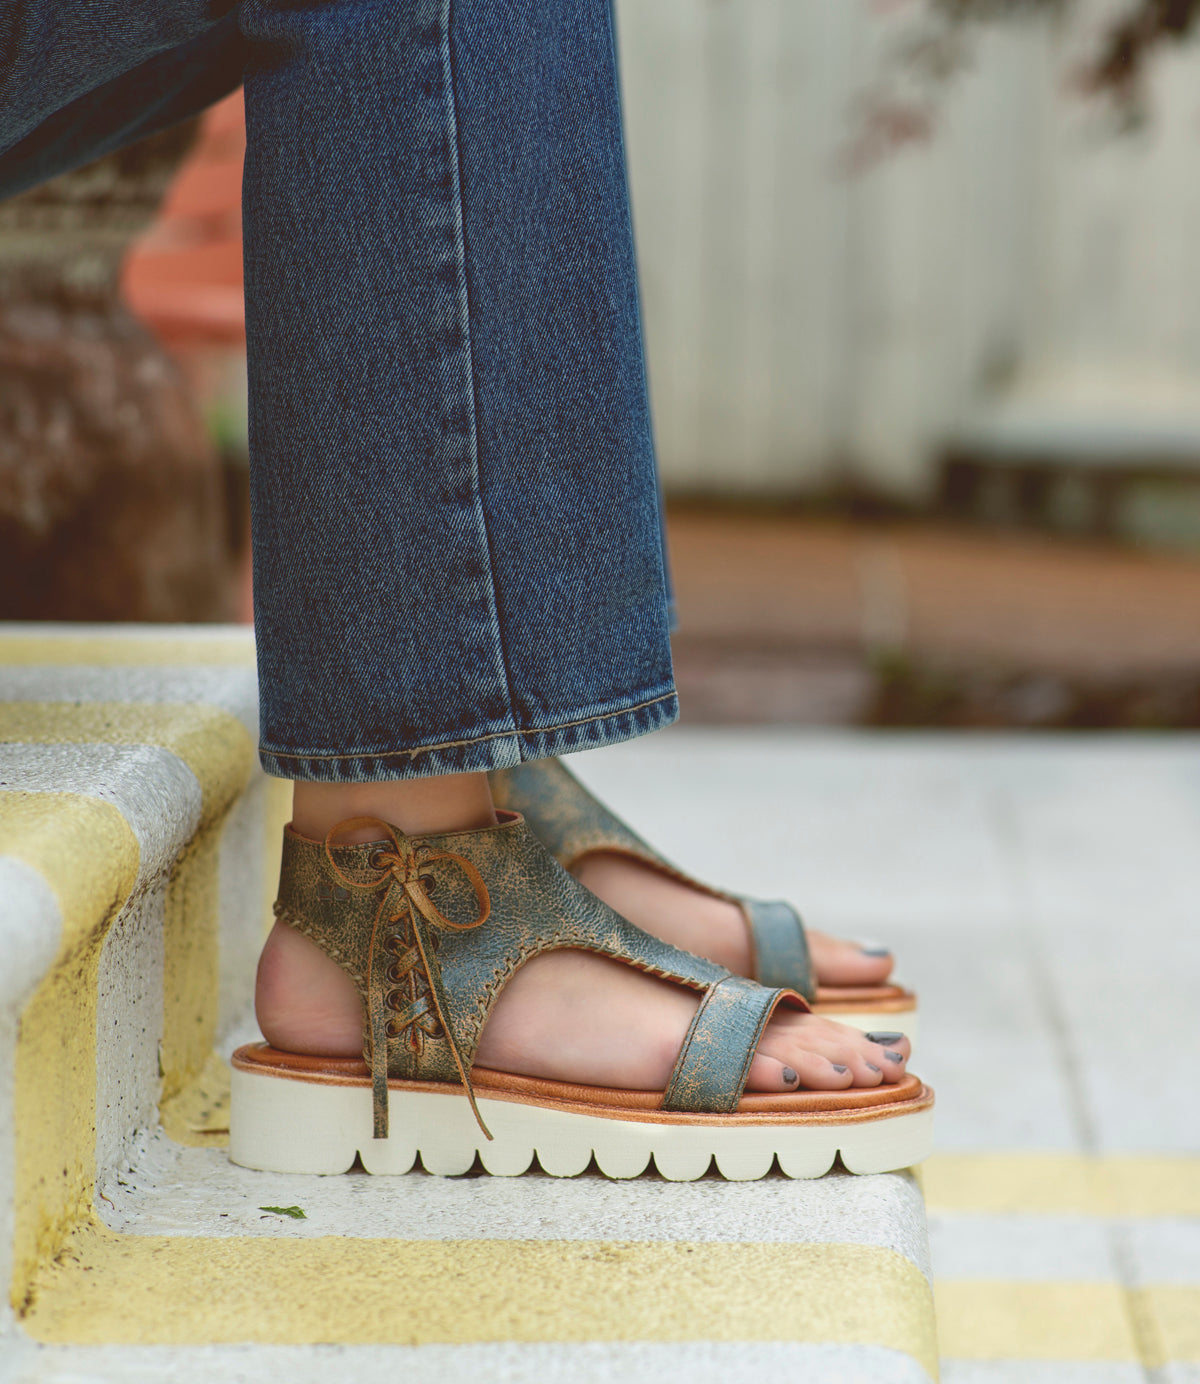 A woman wearing Bed Stu jeans and Bed Stu sandals standing on steps.